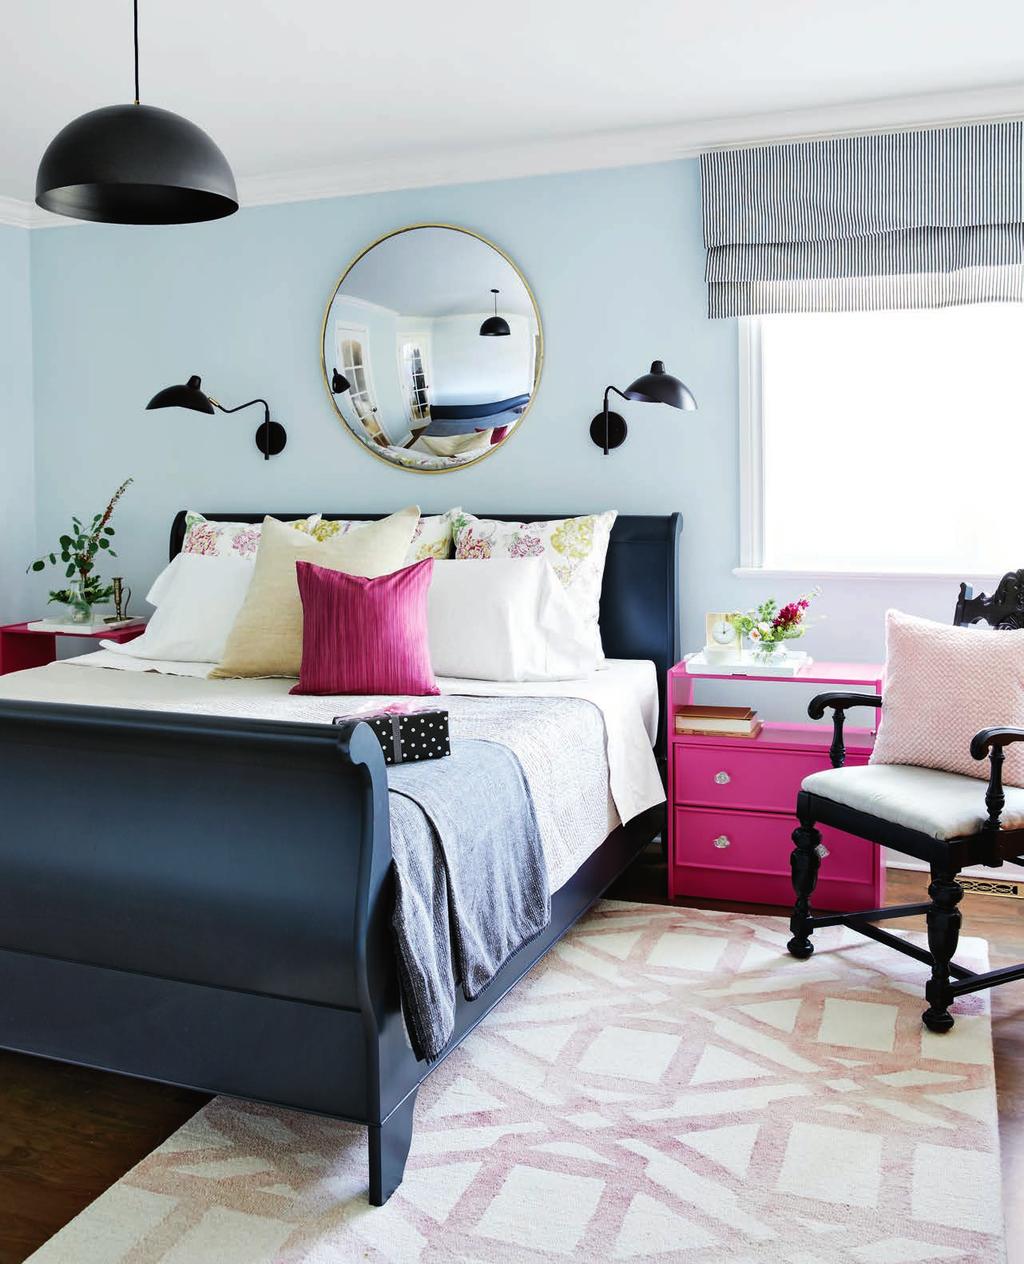 There s a soft neutral palette with bold blue, green and pink